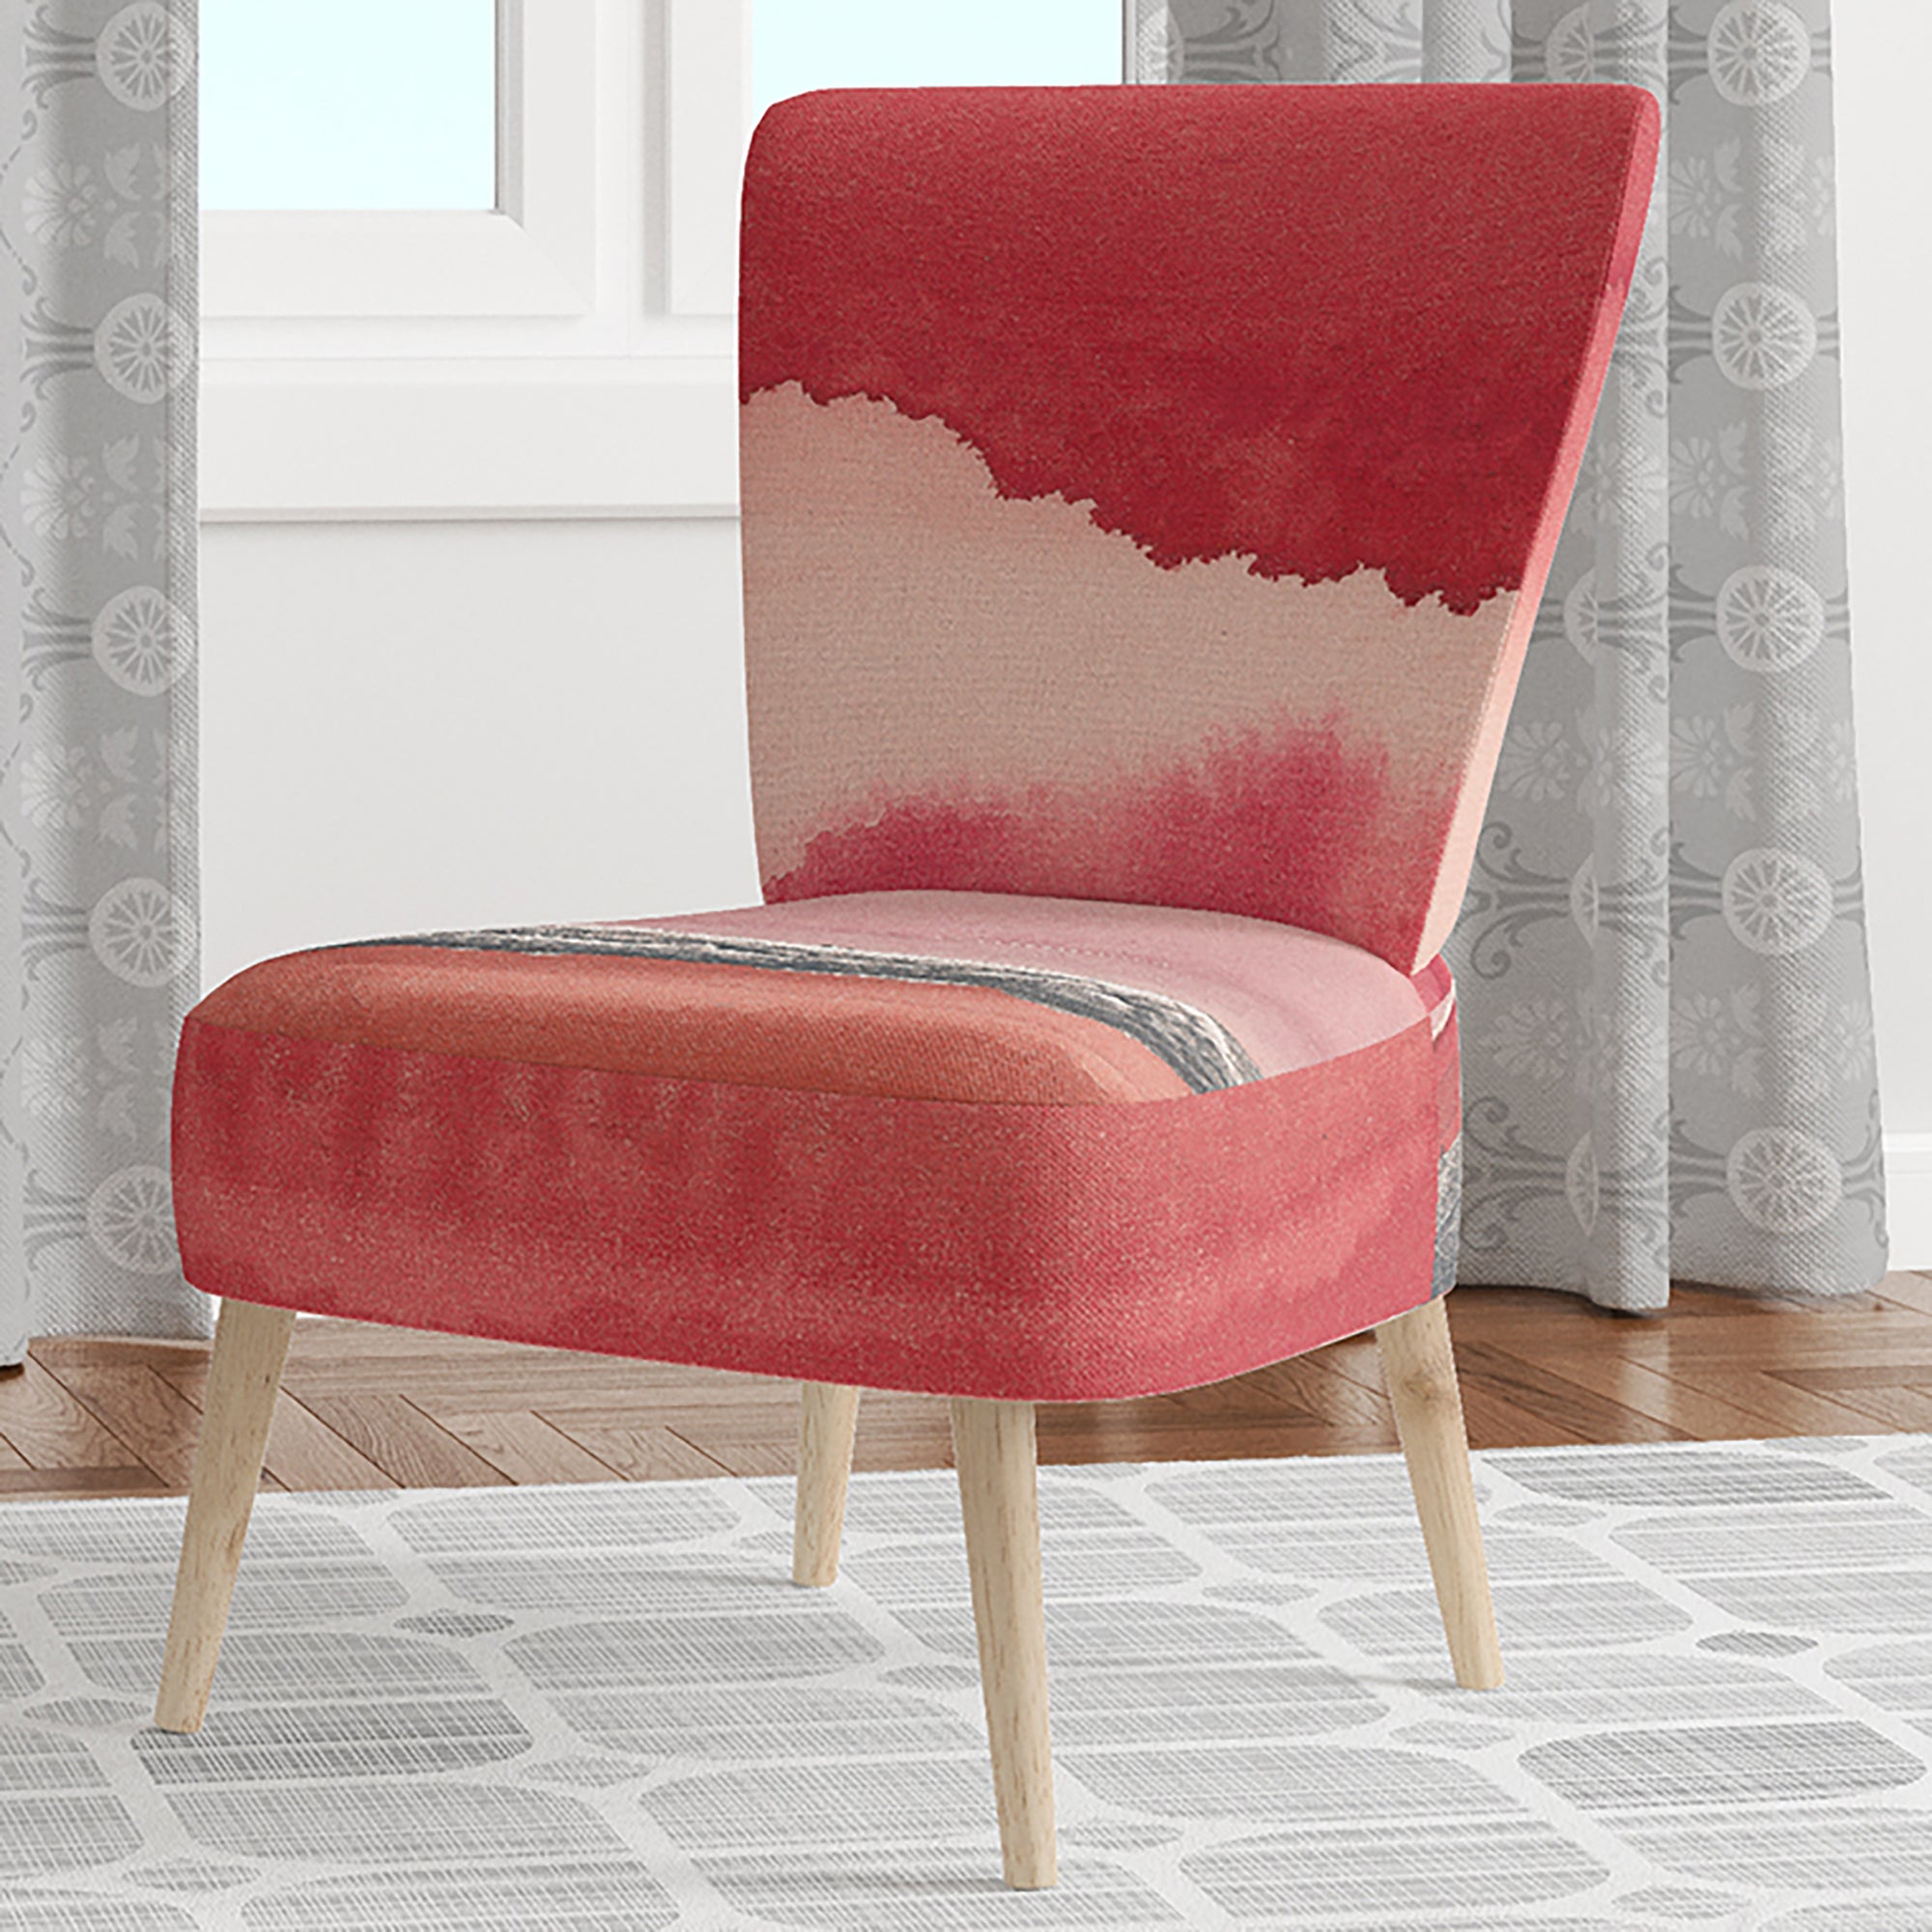 Metallic Glam on Red Modern Glam Accent Chair